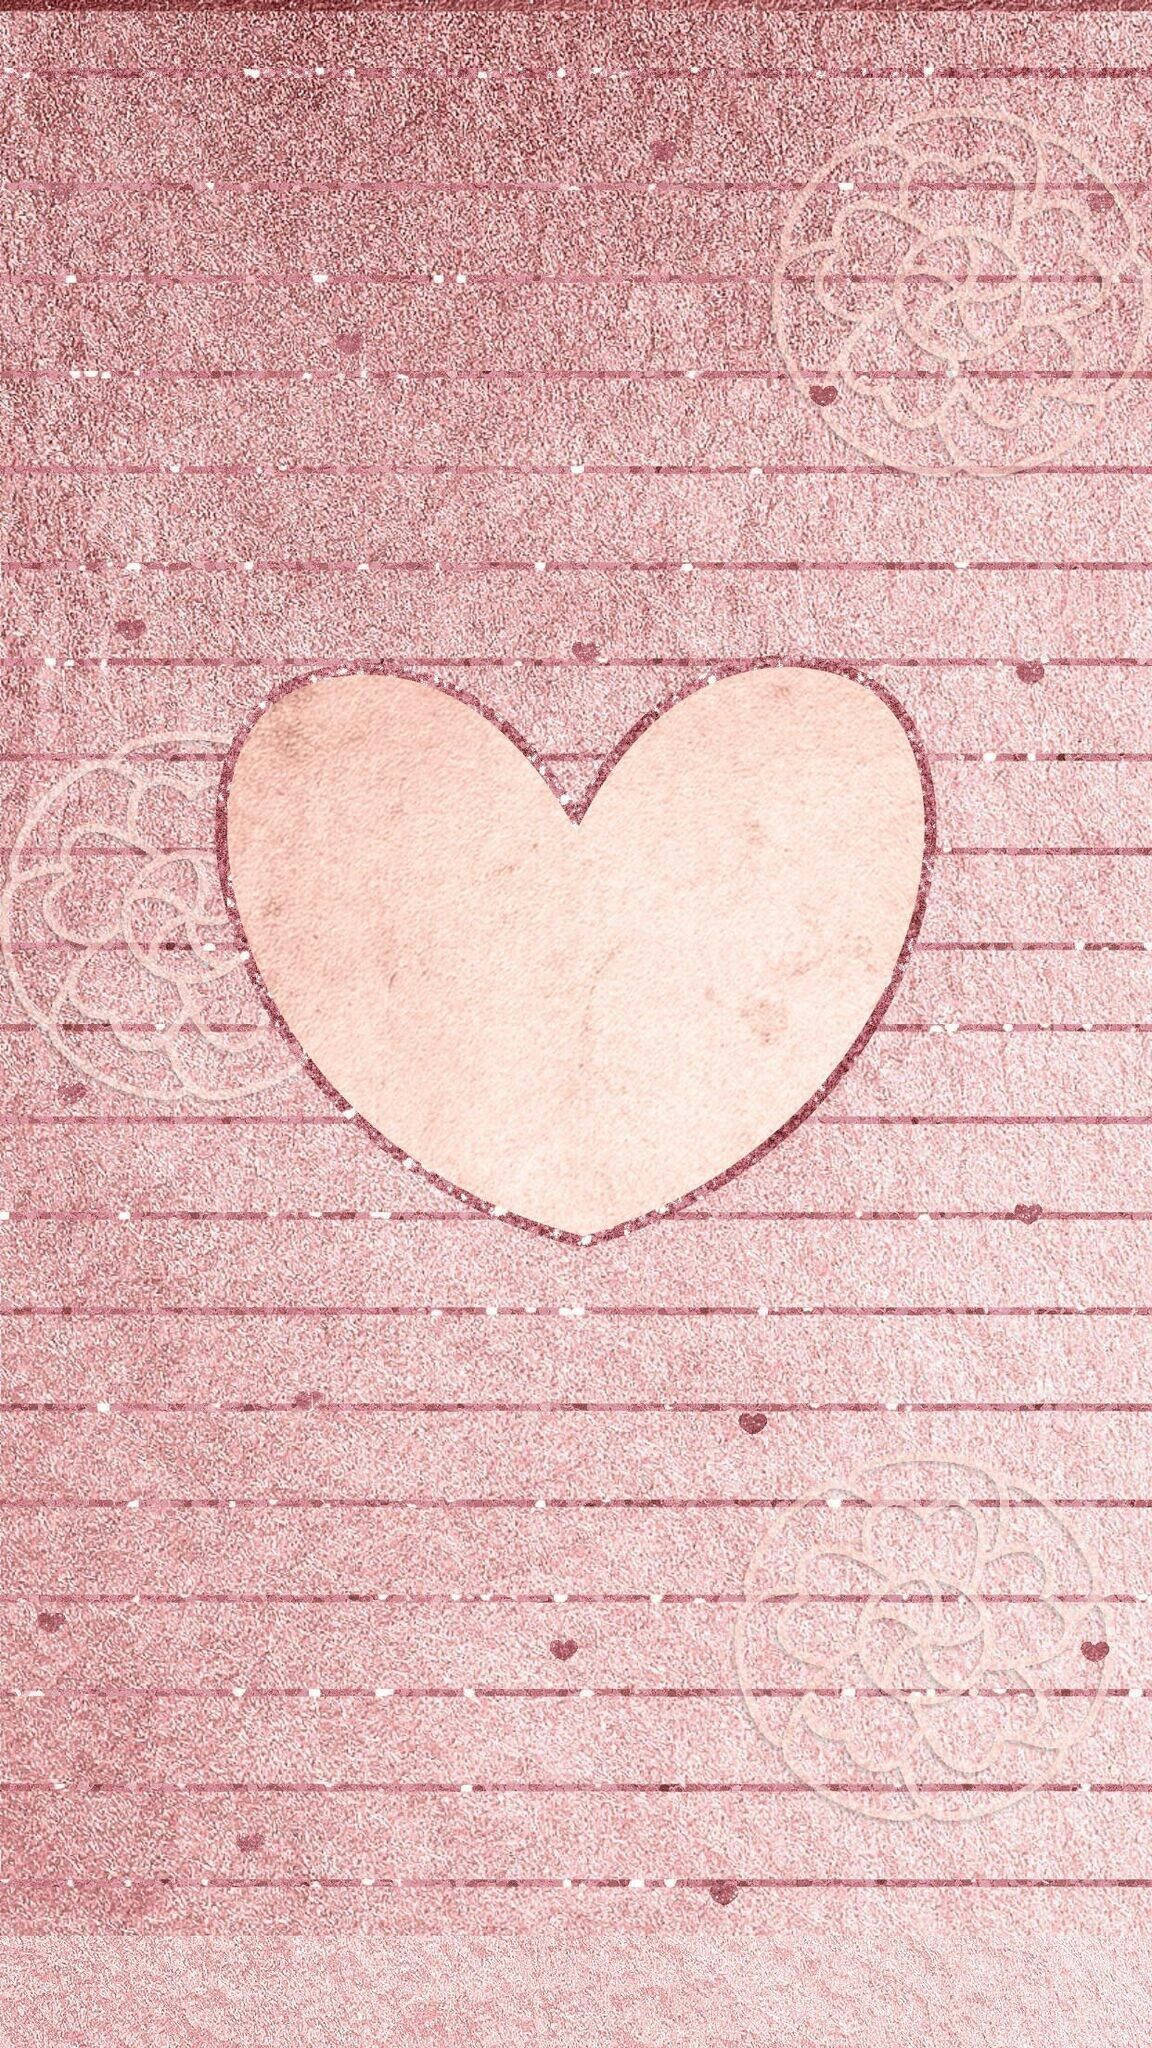 Wall Heart For Cute Girly Phone Wallpaper